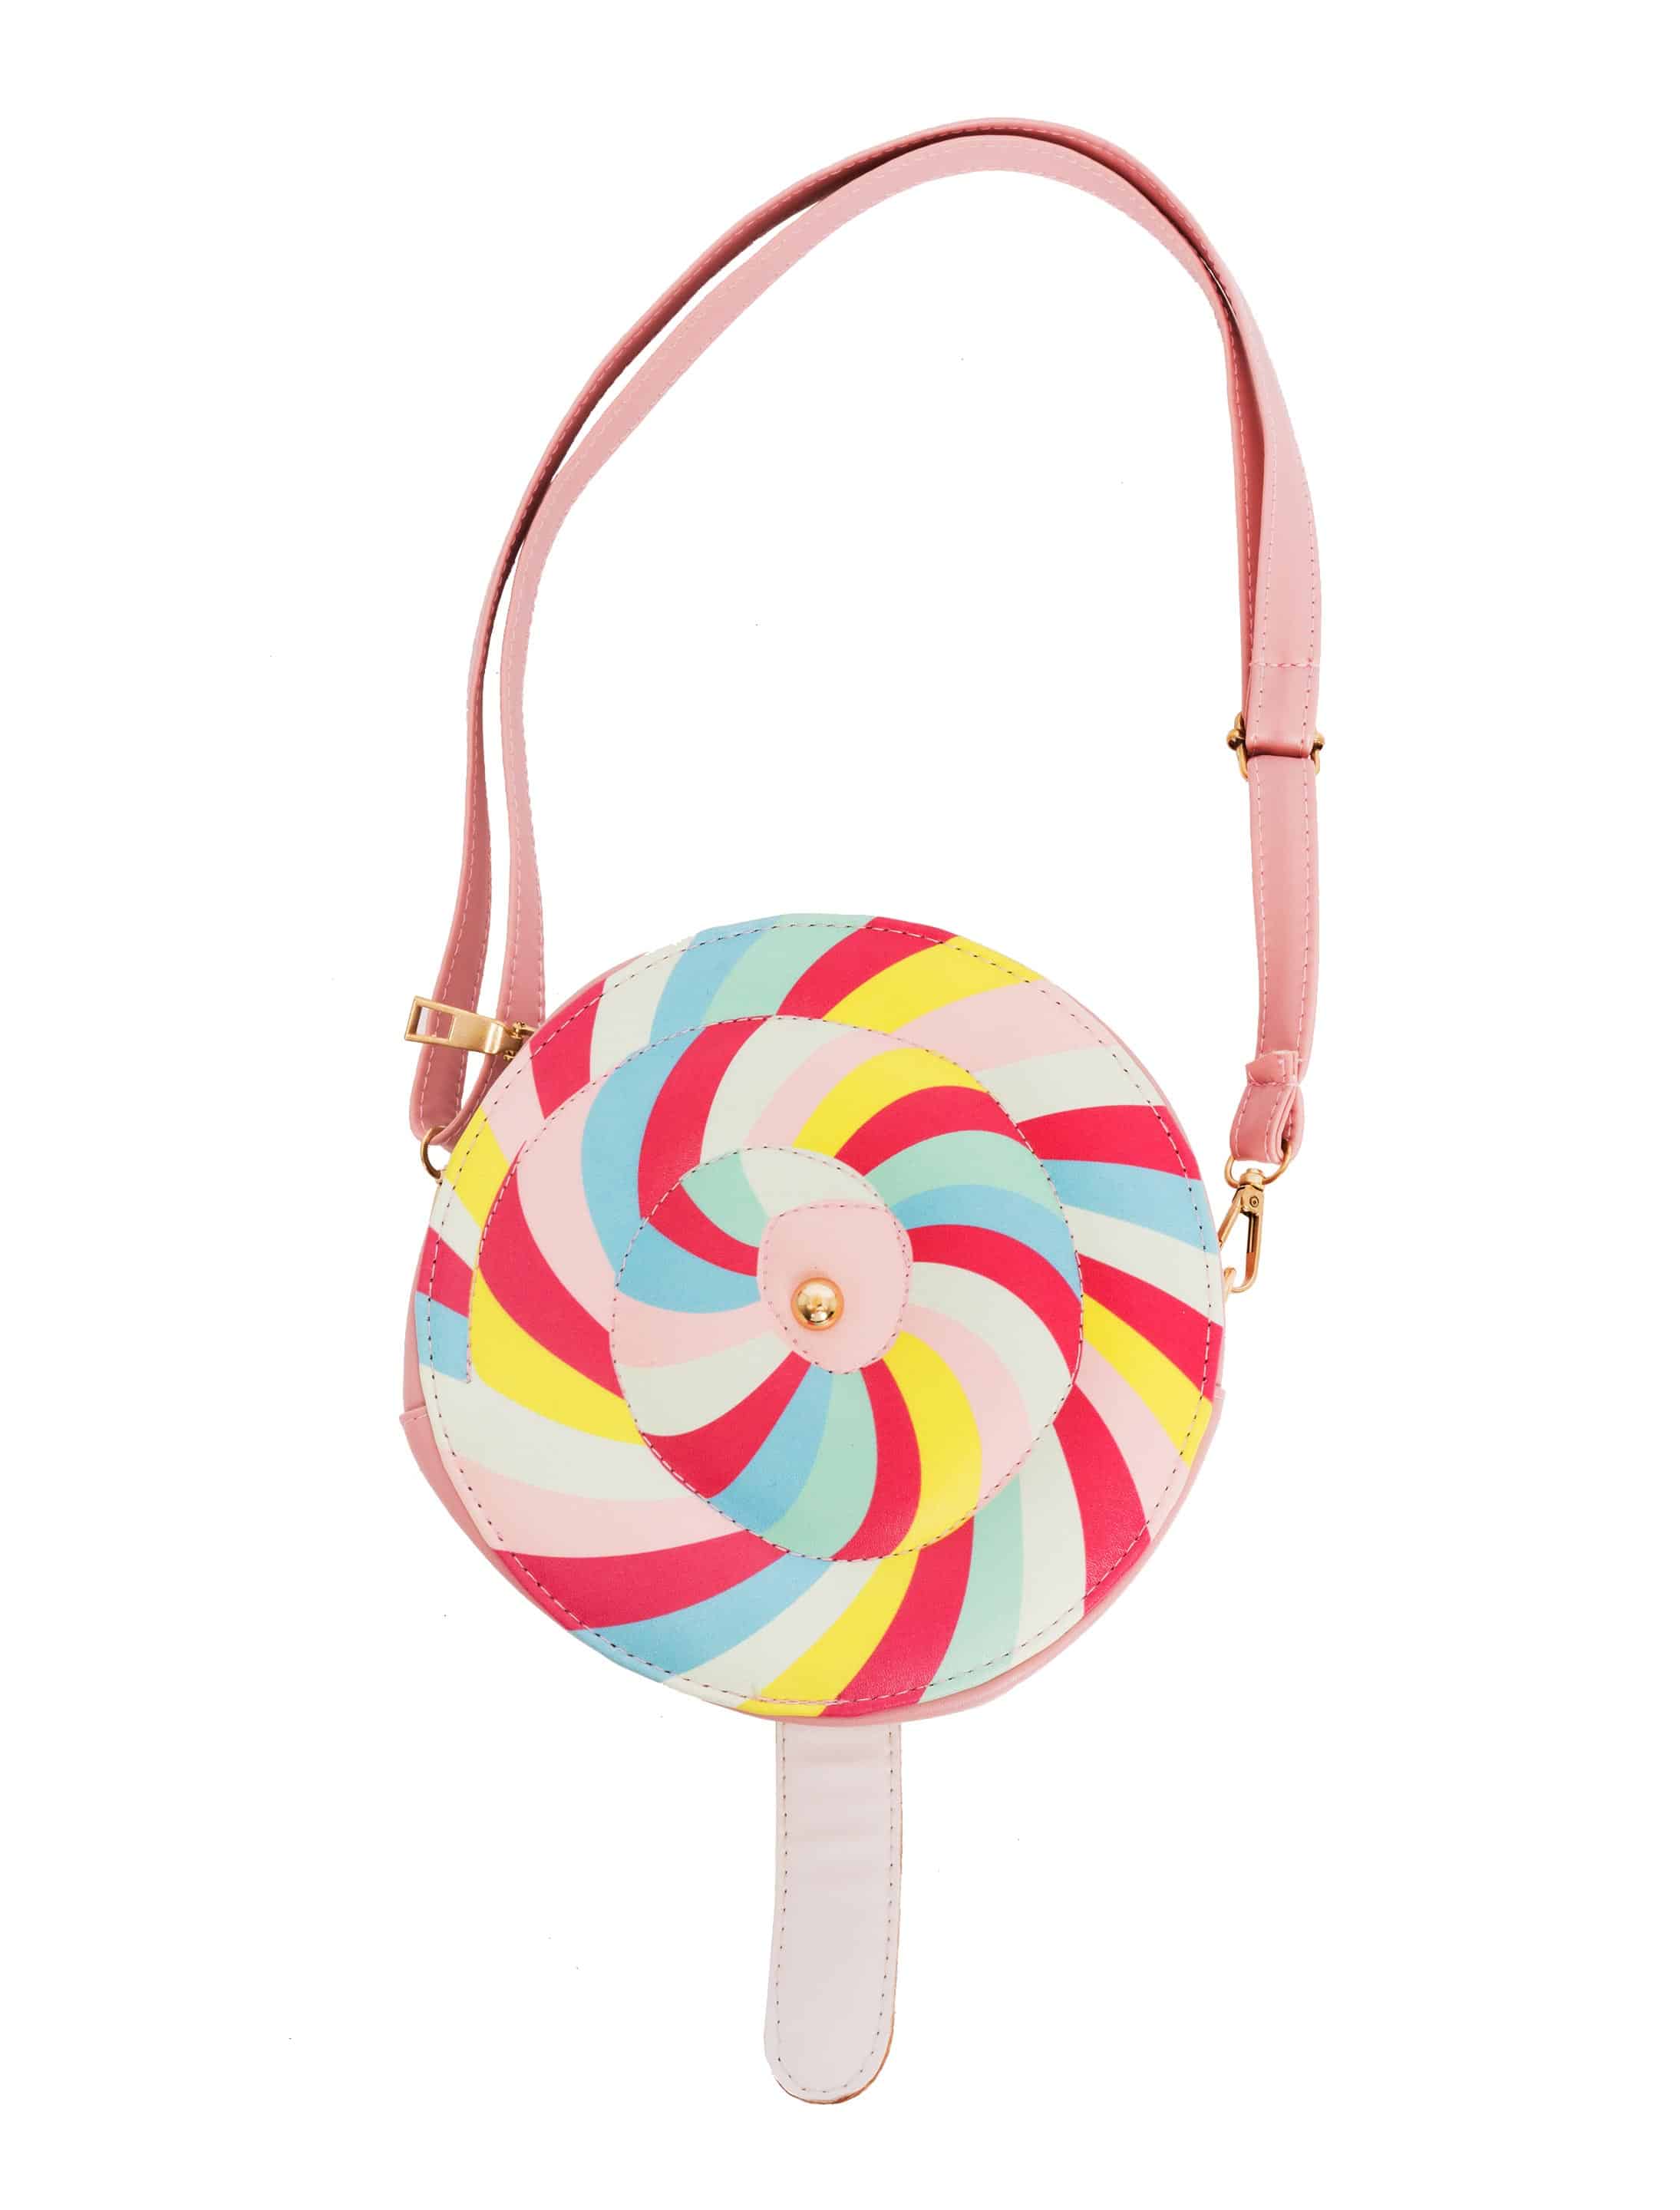 Tasche Candy Lolly mehrfarbig